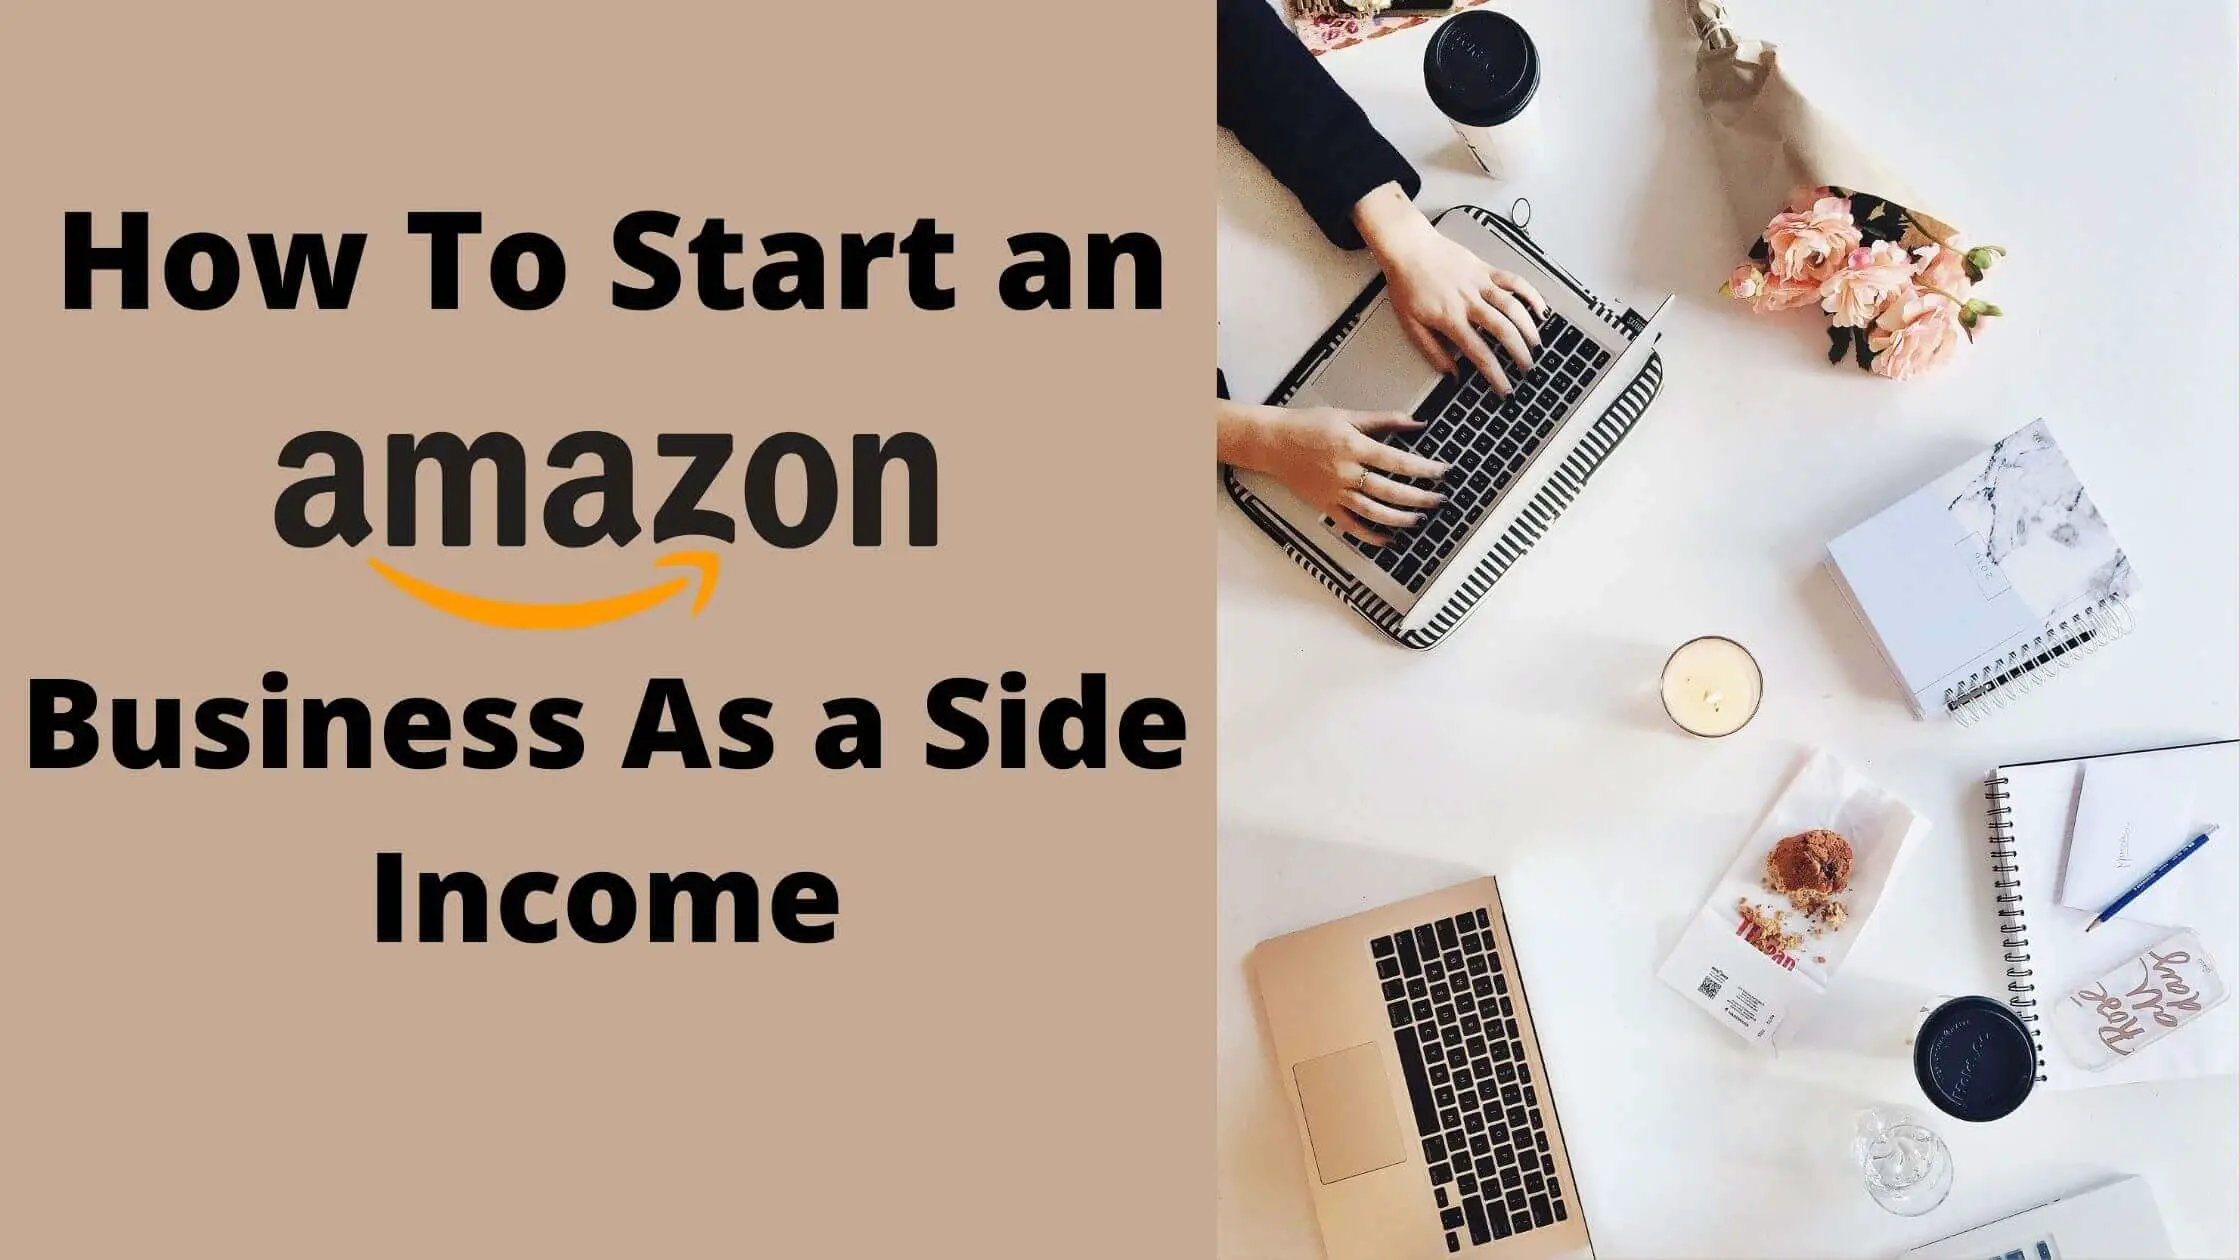 How To Start an Amazon FBA Business As a Side Income